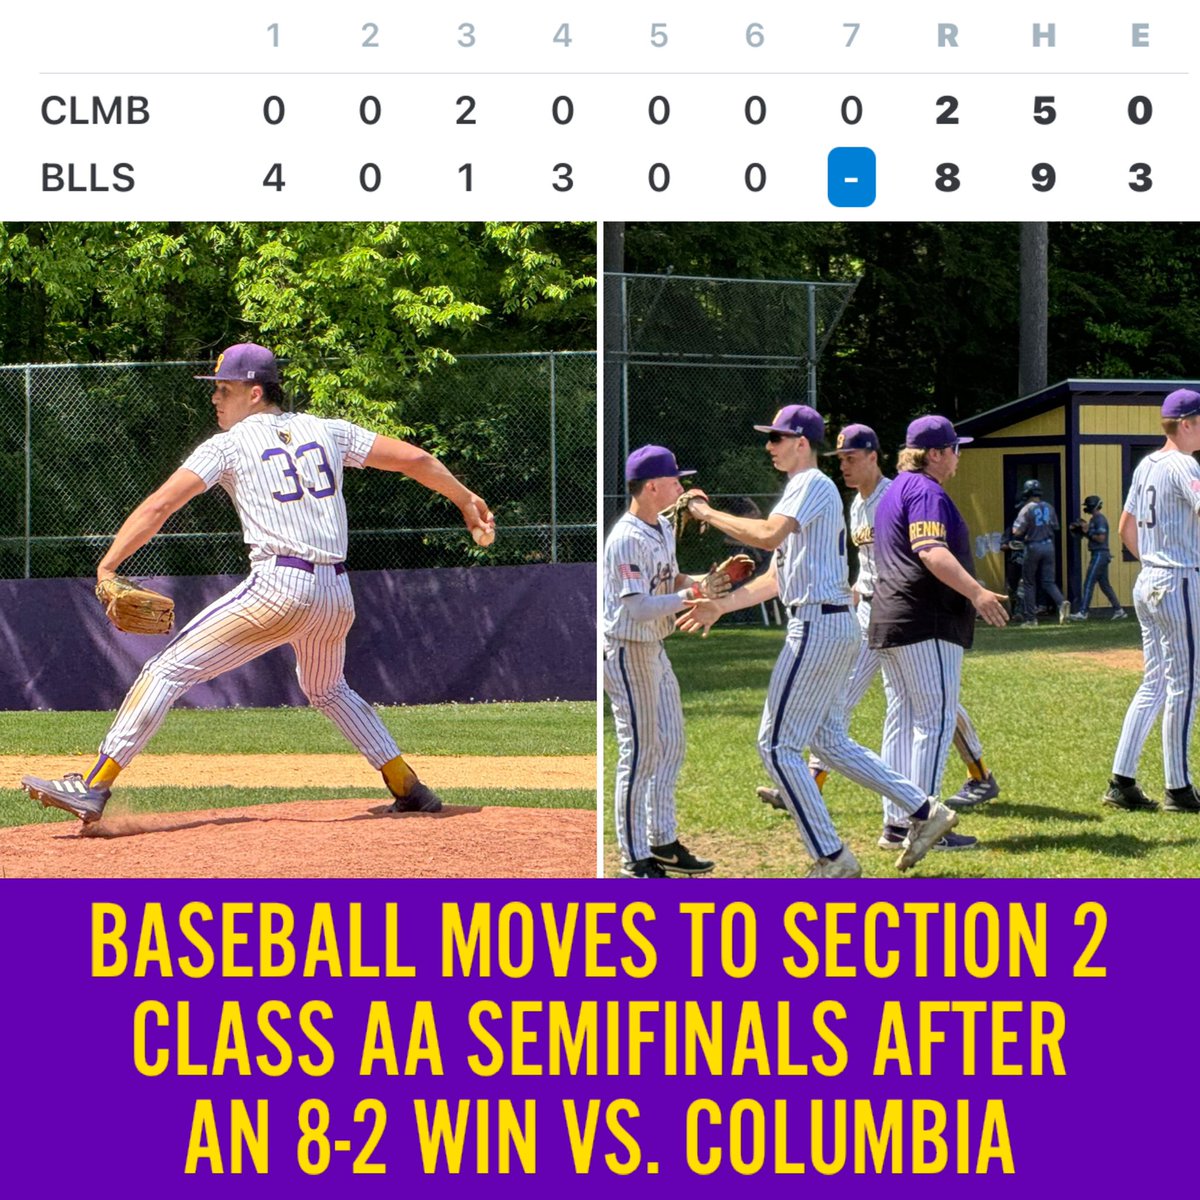 Great day for the @bspadiamonddawg @VBspa_Baseball Team, as @BlaineZoller33 fans 8 in 5 innings, @James__haughton goes 3 for 4, & @DJWBaseball02 has 3 RBIs to help advance the Dawgs to the Section 2 Class AA Semis Monday at 4pm (vs. Bethlehem) following an 8-2 win over Columbia!